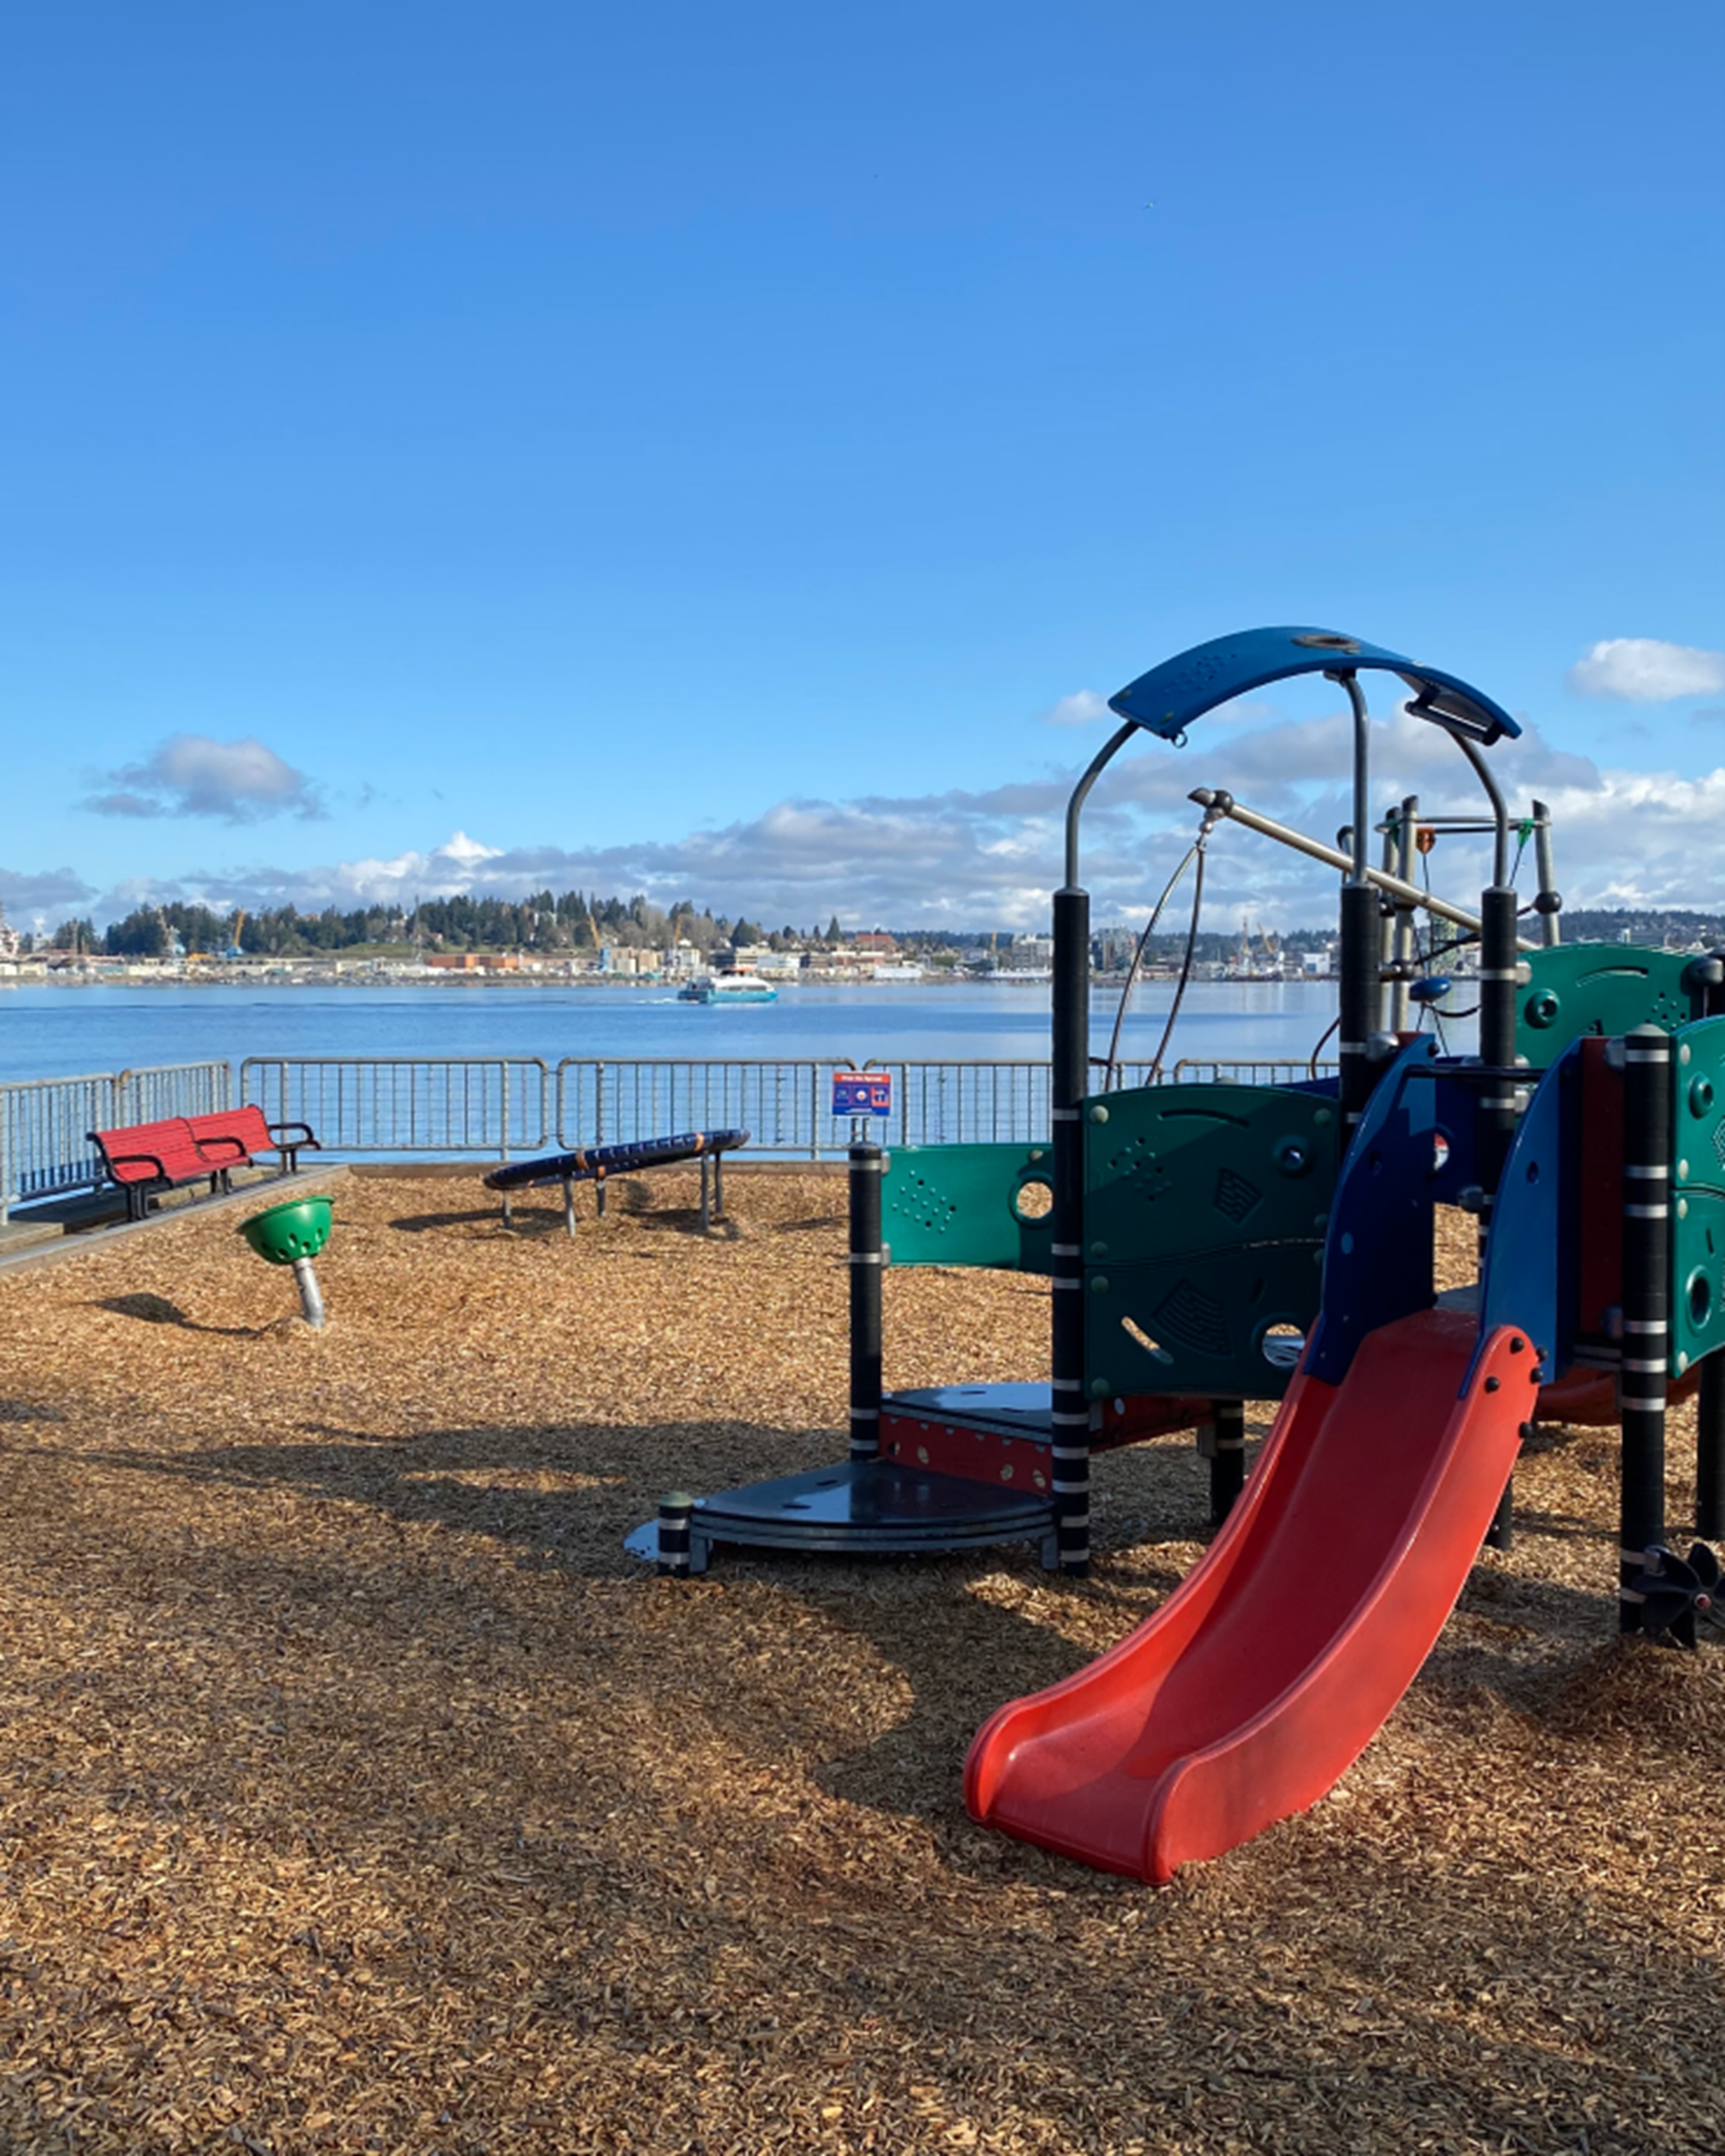 A park by a body of water with a red slide attached to a playset